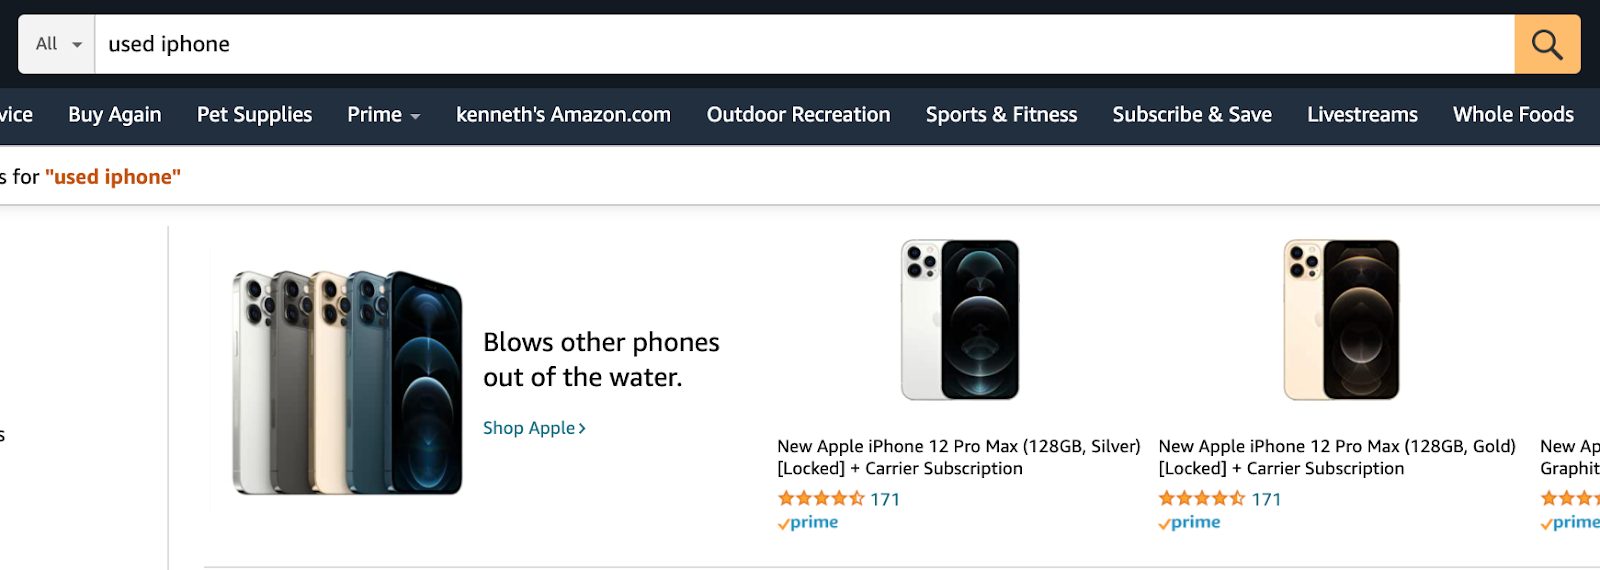 Amazon Renewed - Search Results